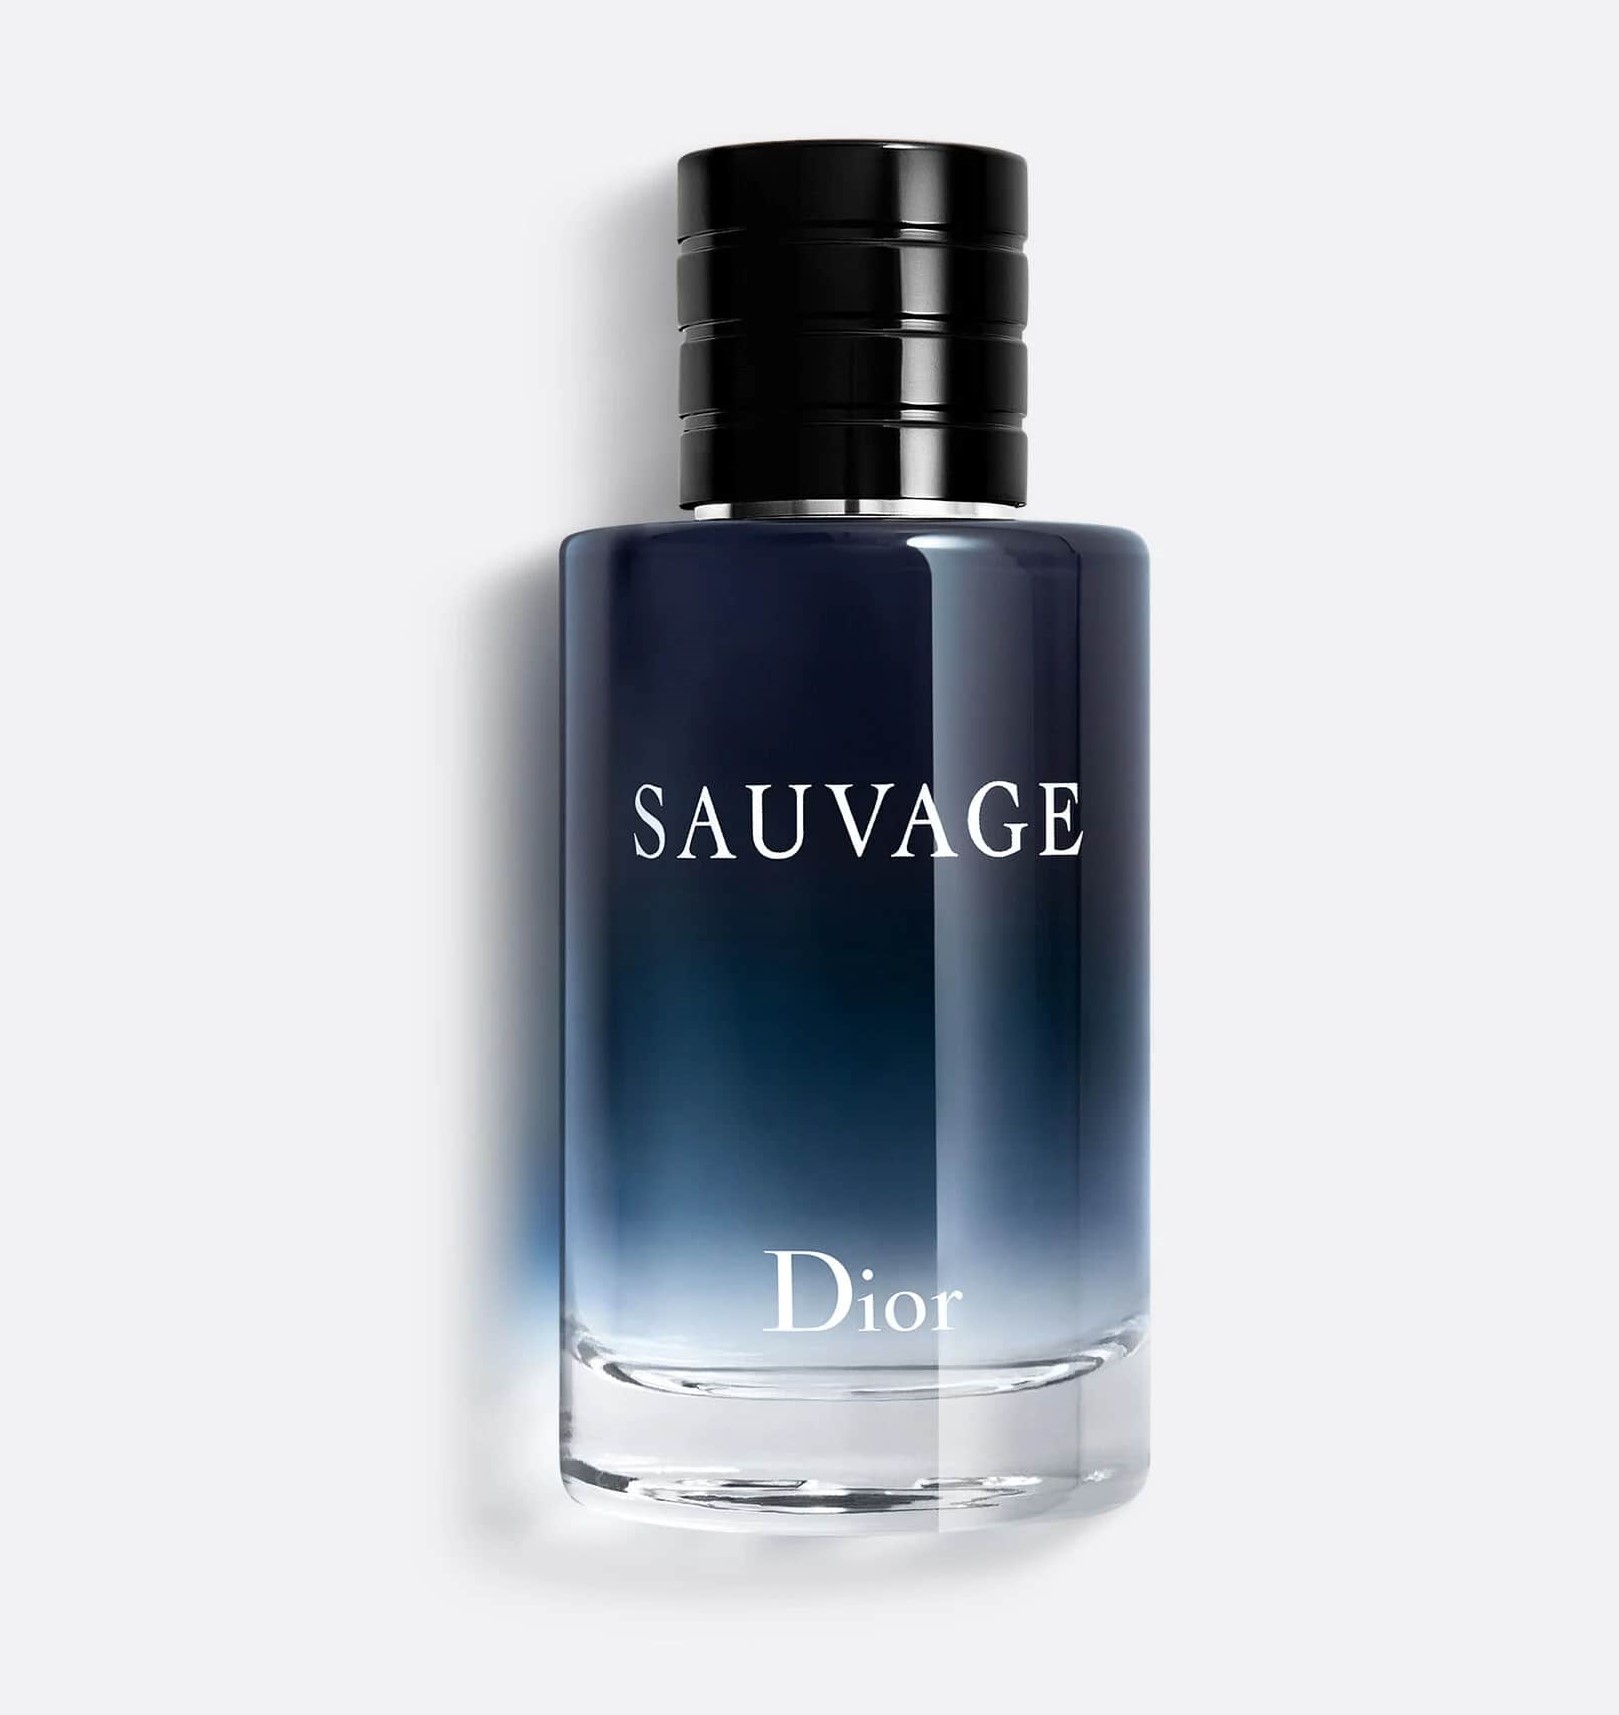 Sauvage EDT Spray Perfume 100ml for Men by Dior